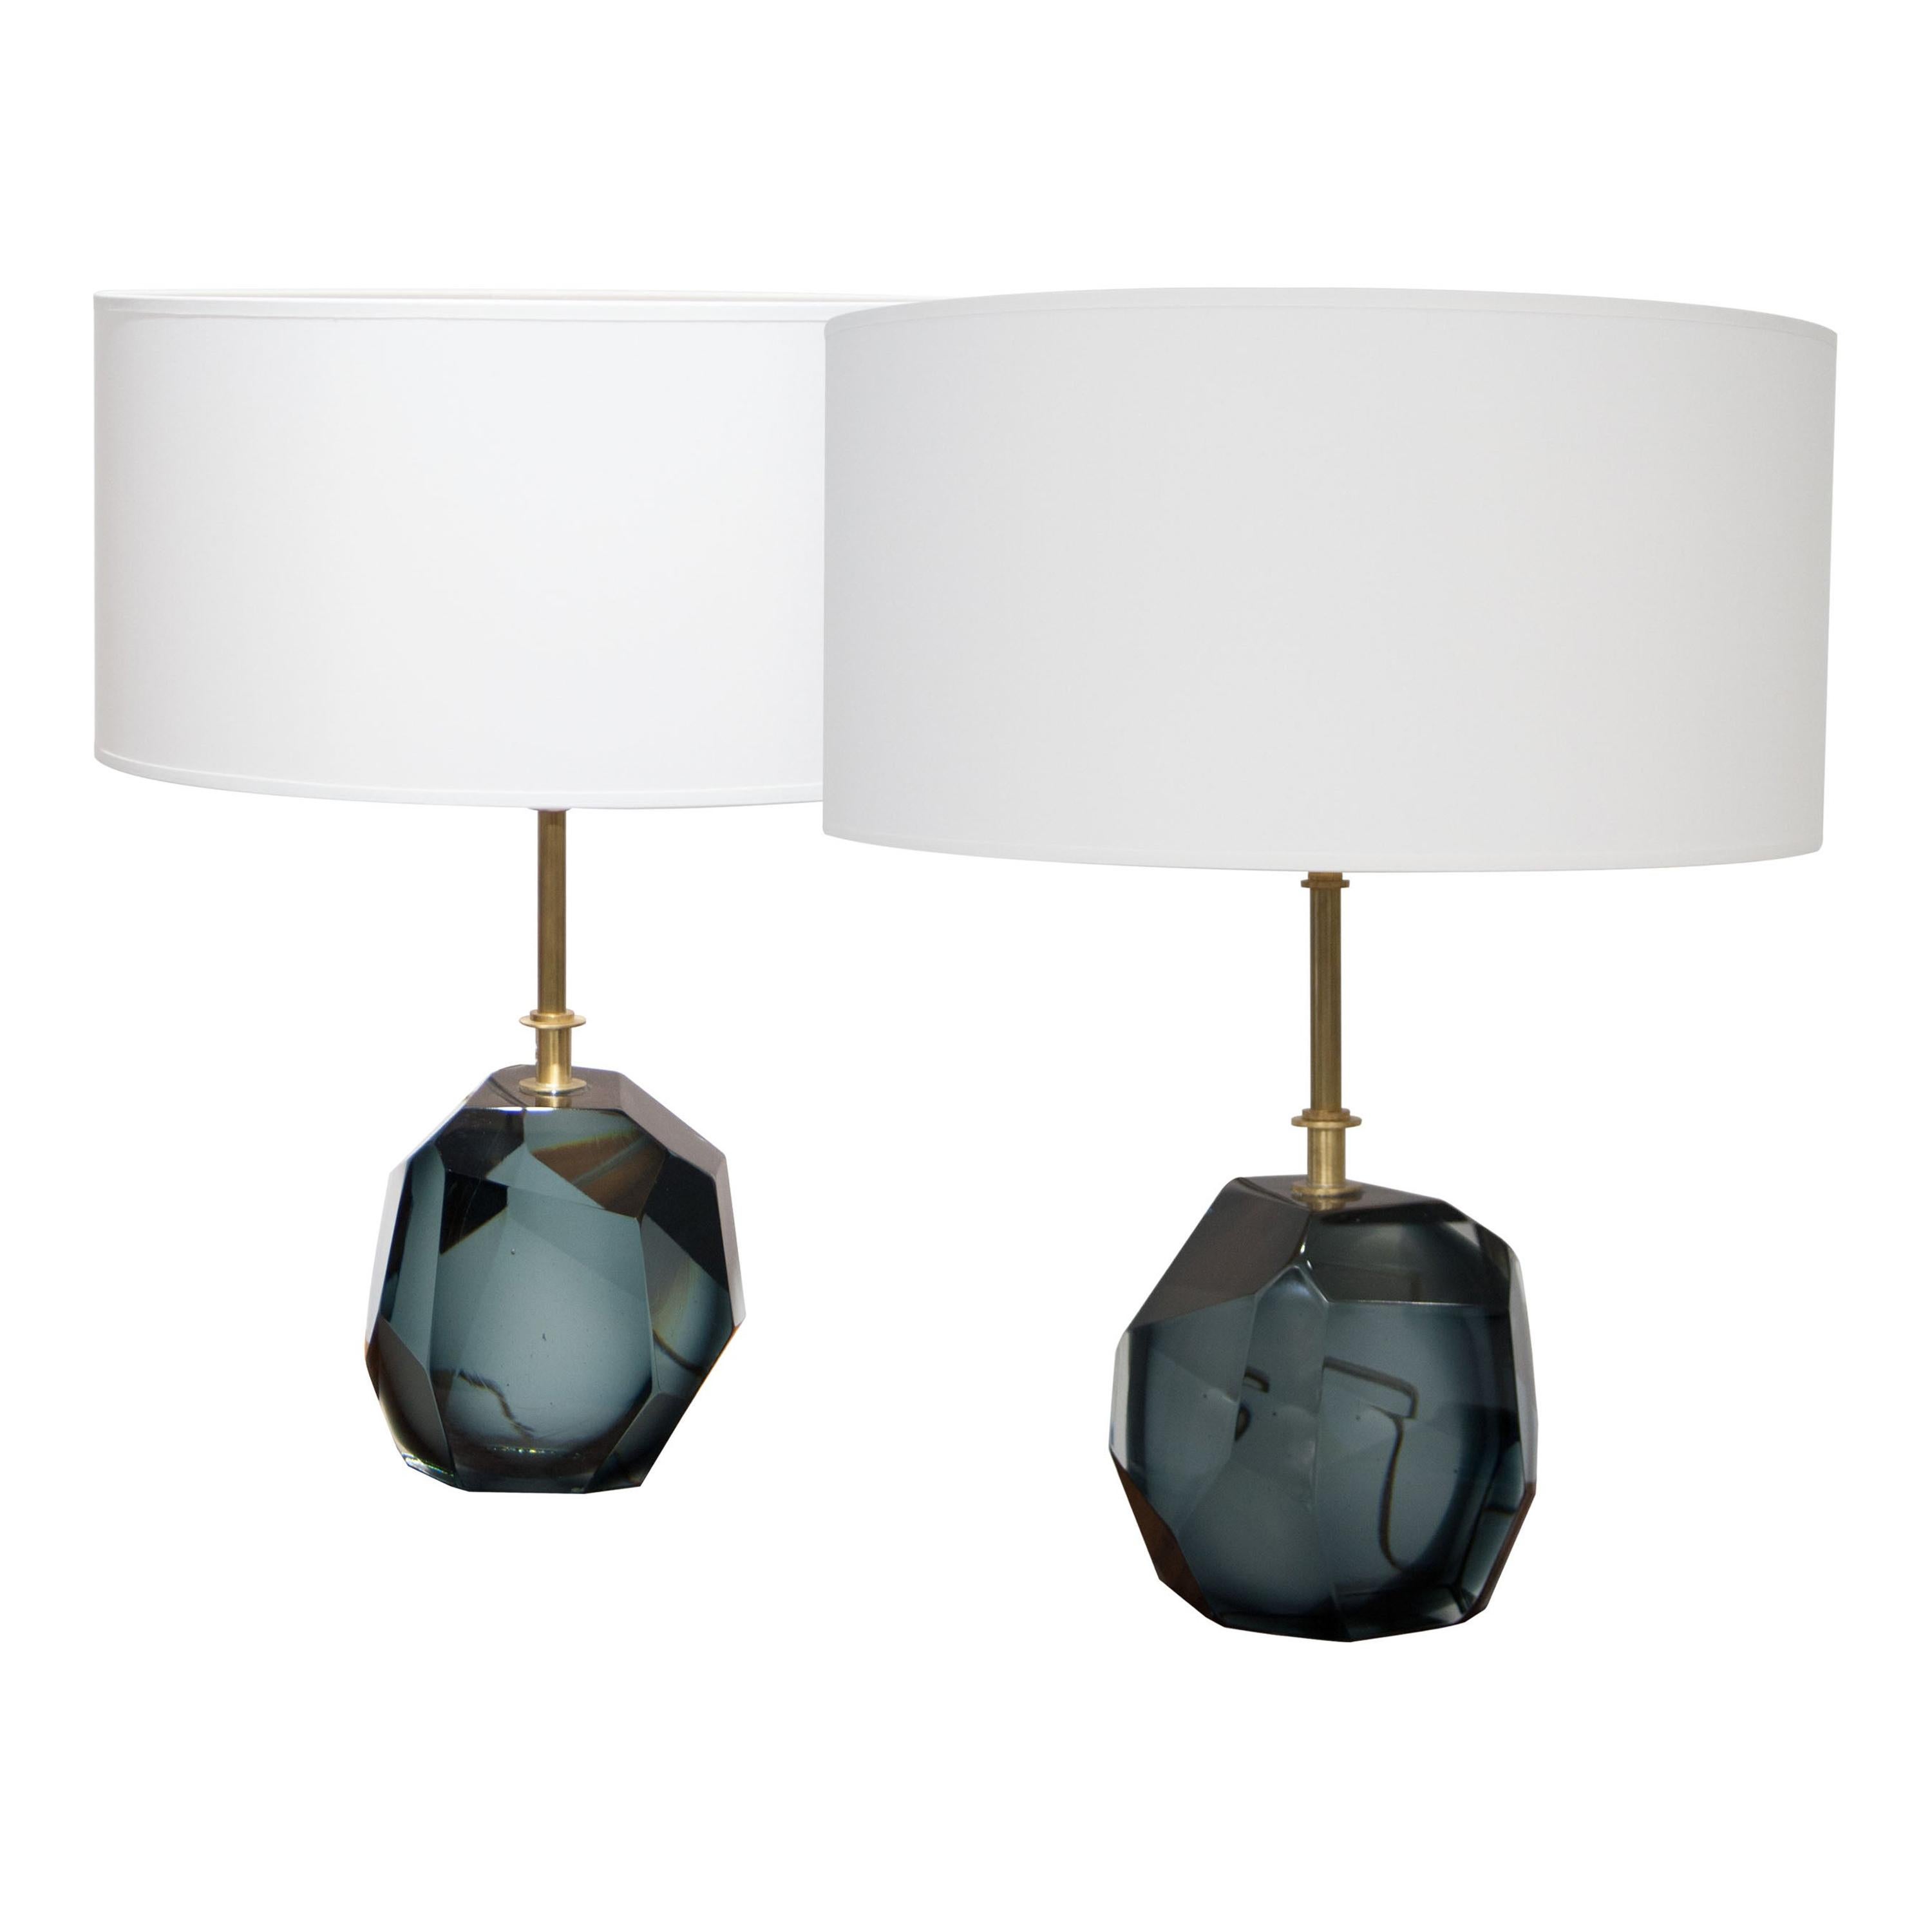 Mid-Century Modern Pair of Murano Table Lamps, Italy, 1950